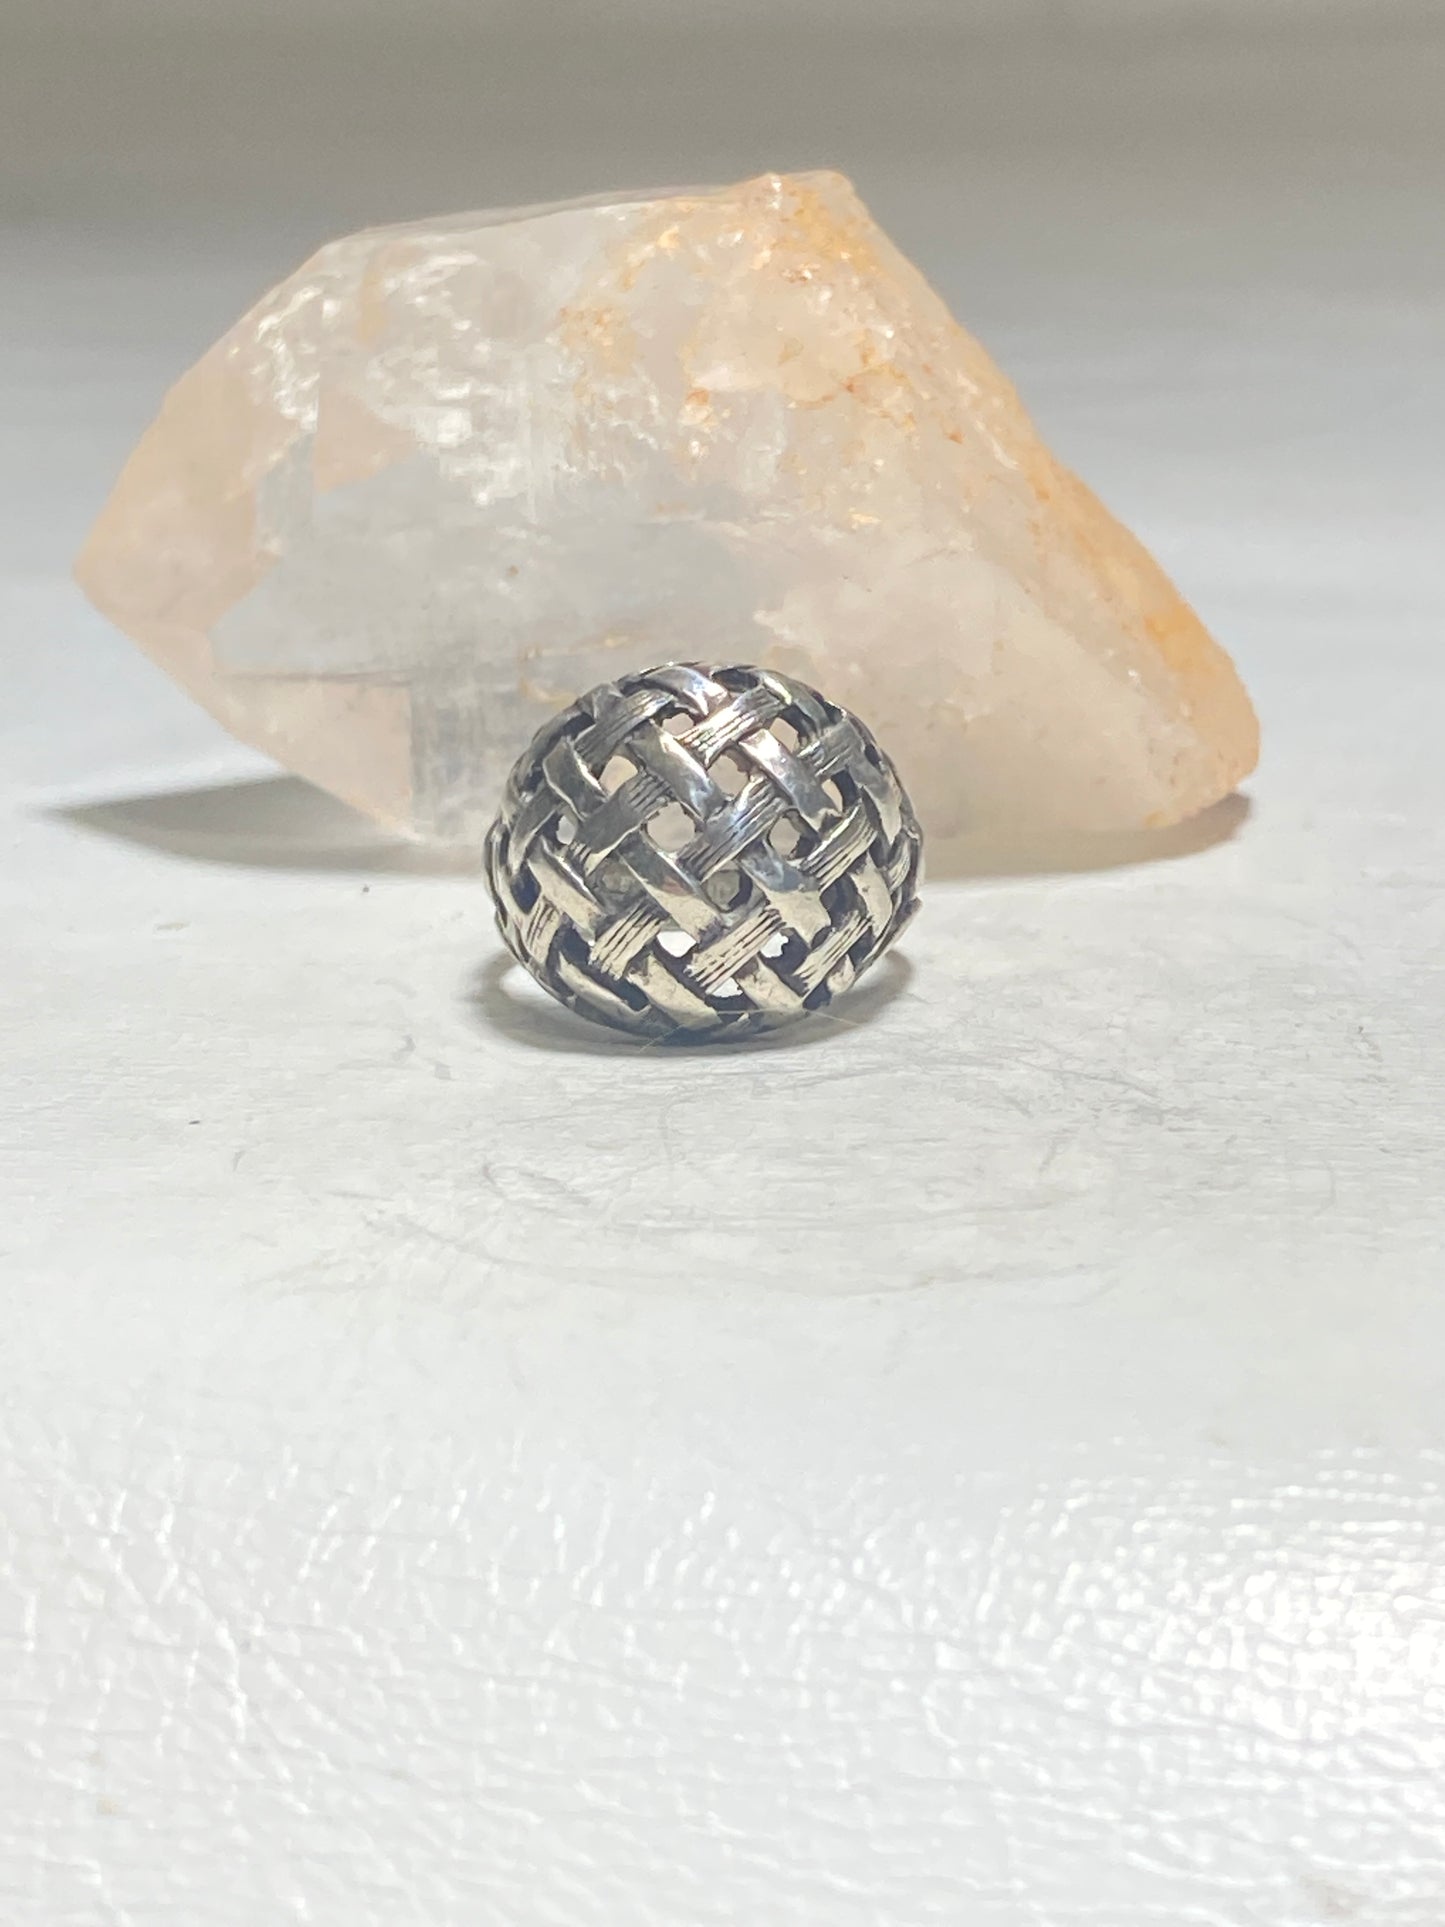 Dome ring Bubble weave band sterling silver women girls